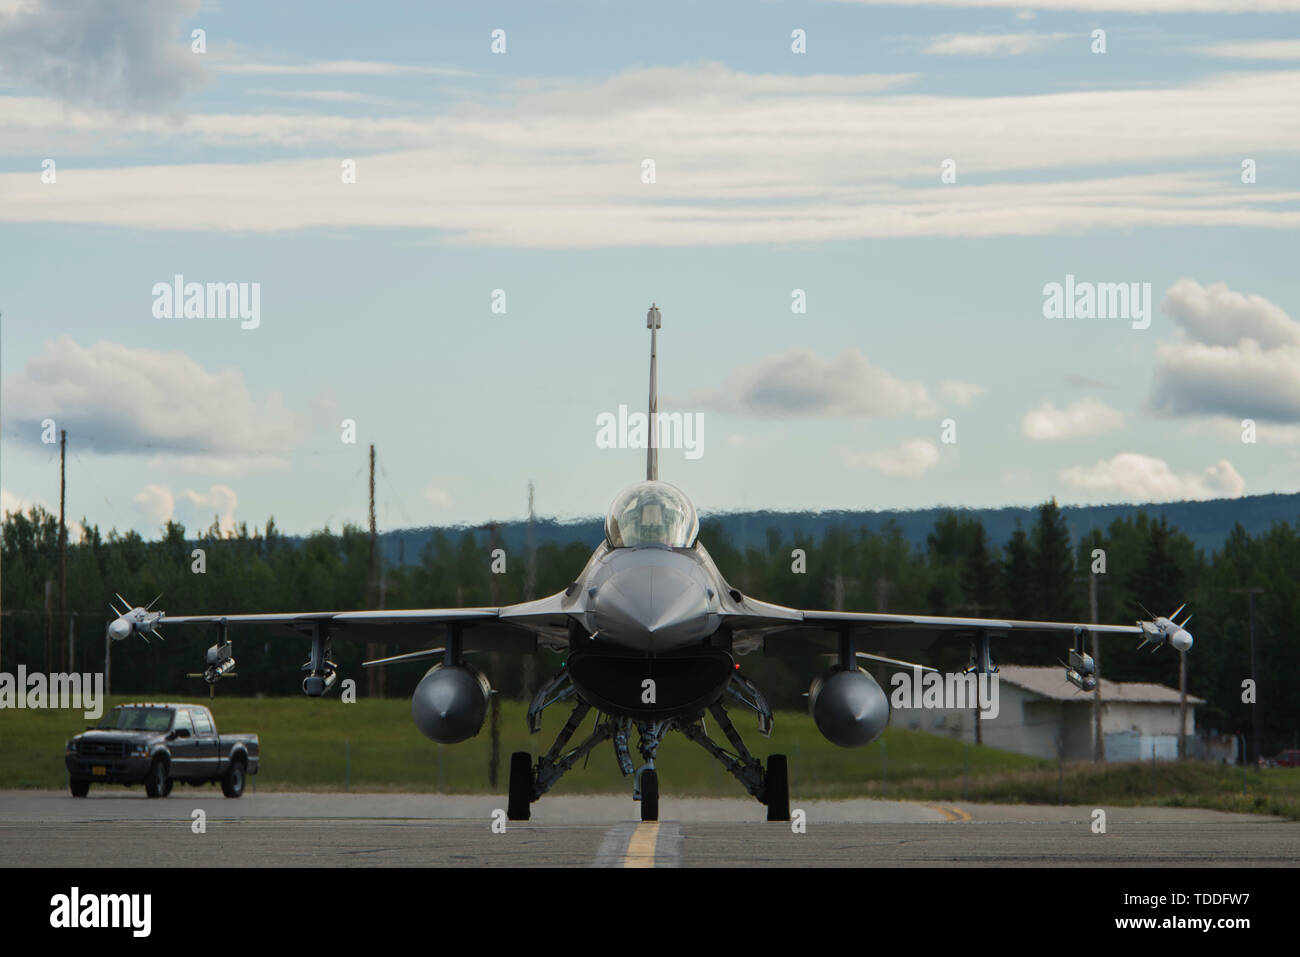 A U.S. Air Force F-16 Fighting Falcon assigned to the 18th Aggressor Squadron (AGRS), taxis toward the flightline during RED FLAG-Alaska 19-2 at Eielson Air Force Base, Alaska, June 10, 2019. The 18th AGRS replicates enemy tactics to give new pilots from visiting units the experience and training of simulated combat. (U.S. Air Force photo by Airman 1st Class Aaron Larue Guerrisky) Stock Photo